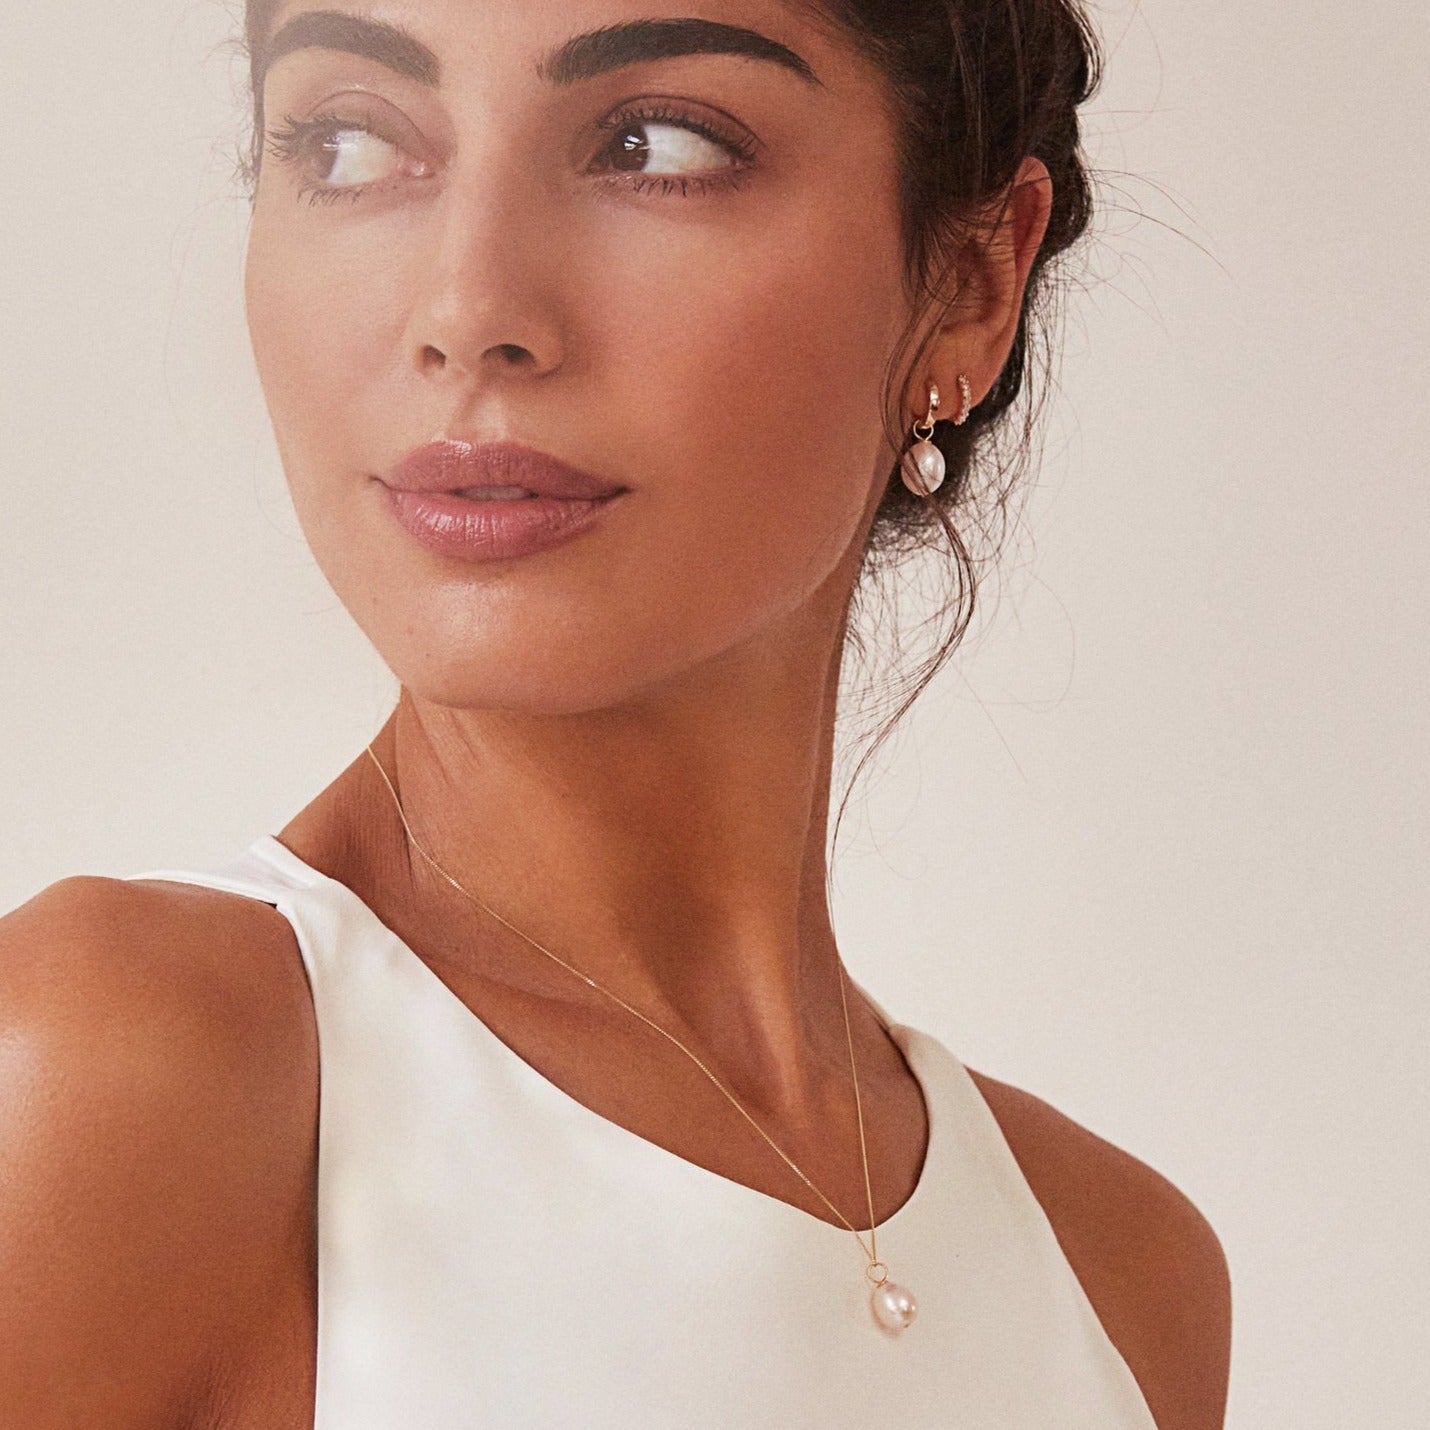 Gold large single pearl necklace around neck with white high neck top on a brunette woman looking to the side wearing a gold plain huggie pearl drop hoop earring in her ear lobe